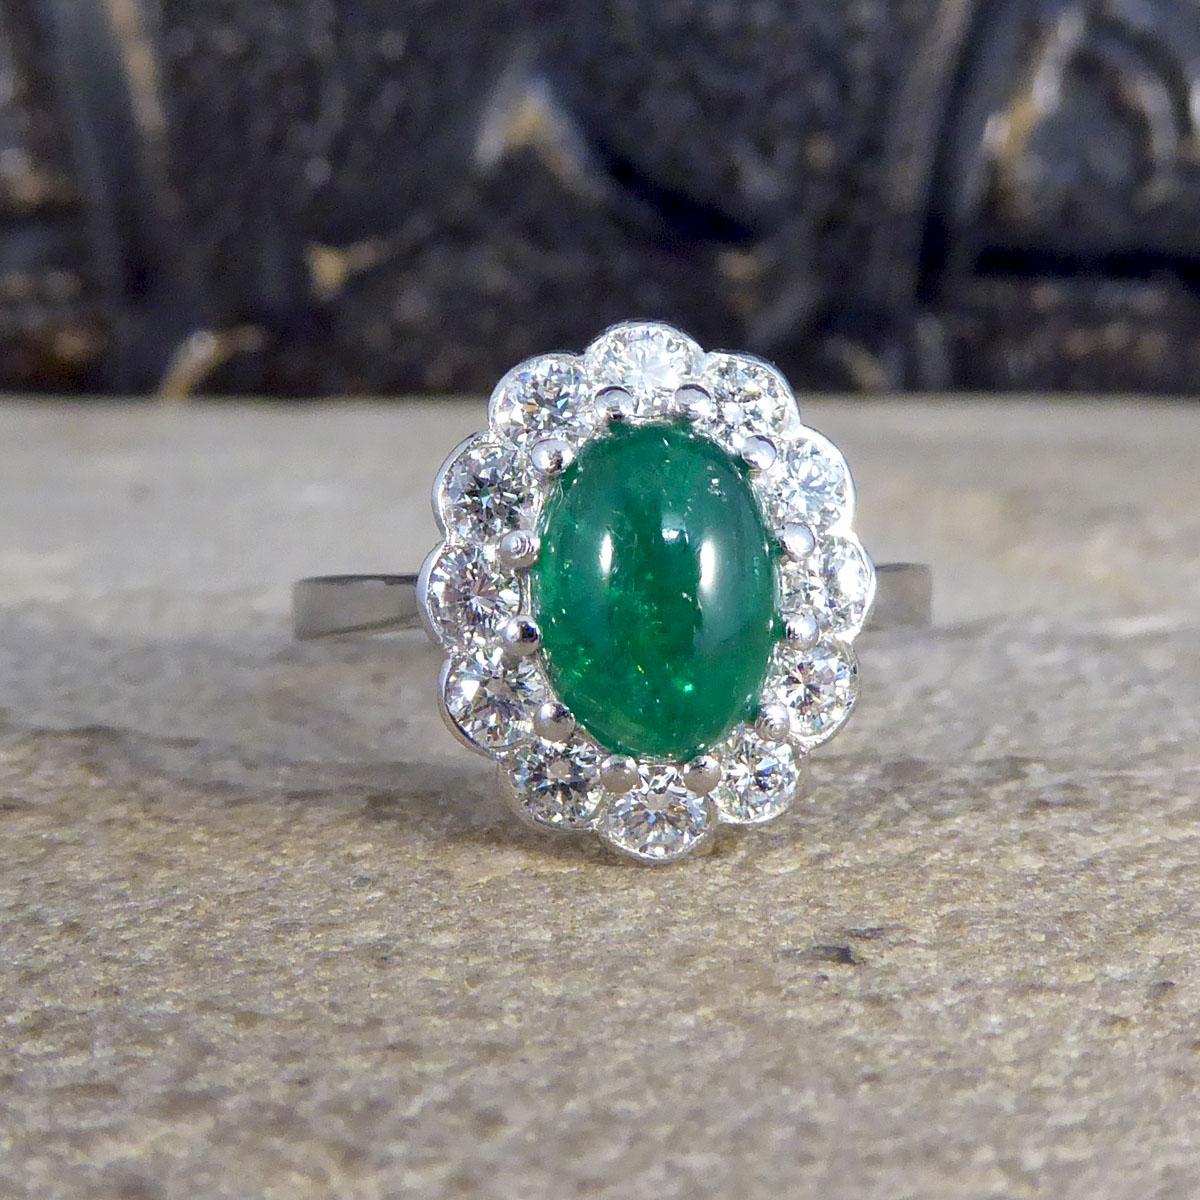 Featuring a vibrant green Cabochon Emerald weighing 1.27ct in a claw setting, this ring shows such quality through the gemstones and such bright colour that the Emerald has. The gorgeous contemporary ring is clustered with round cut diamonds